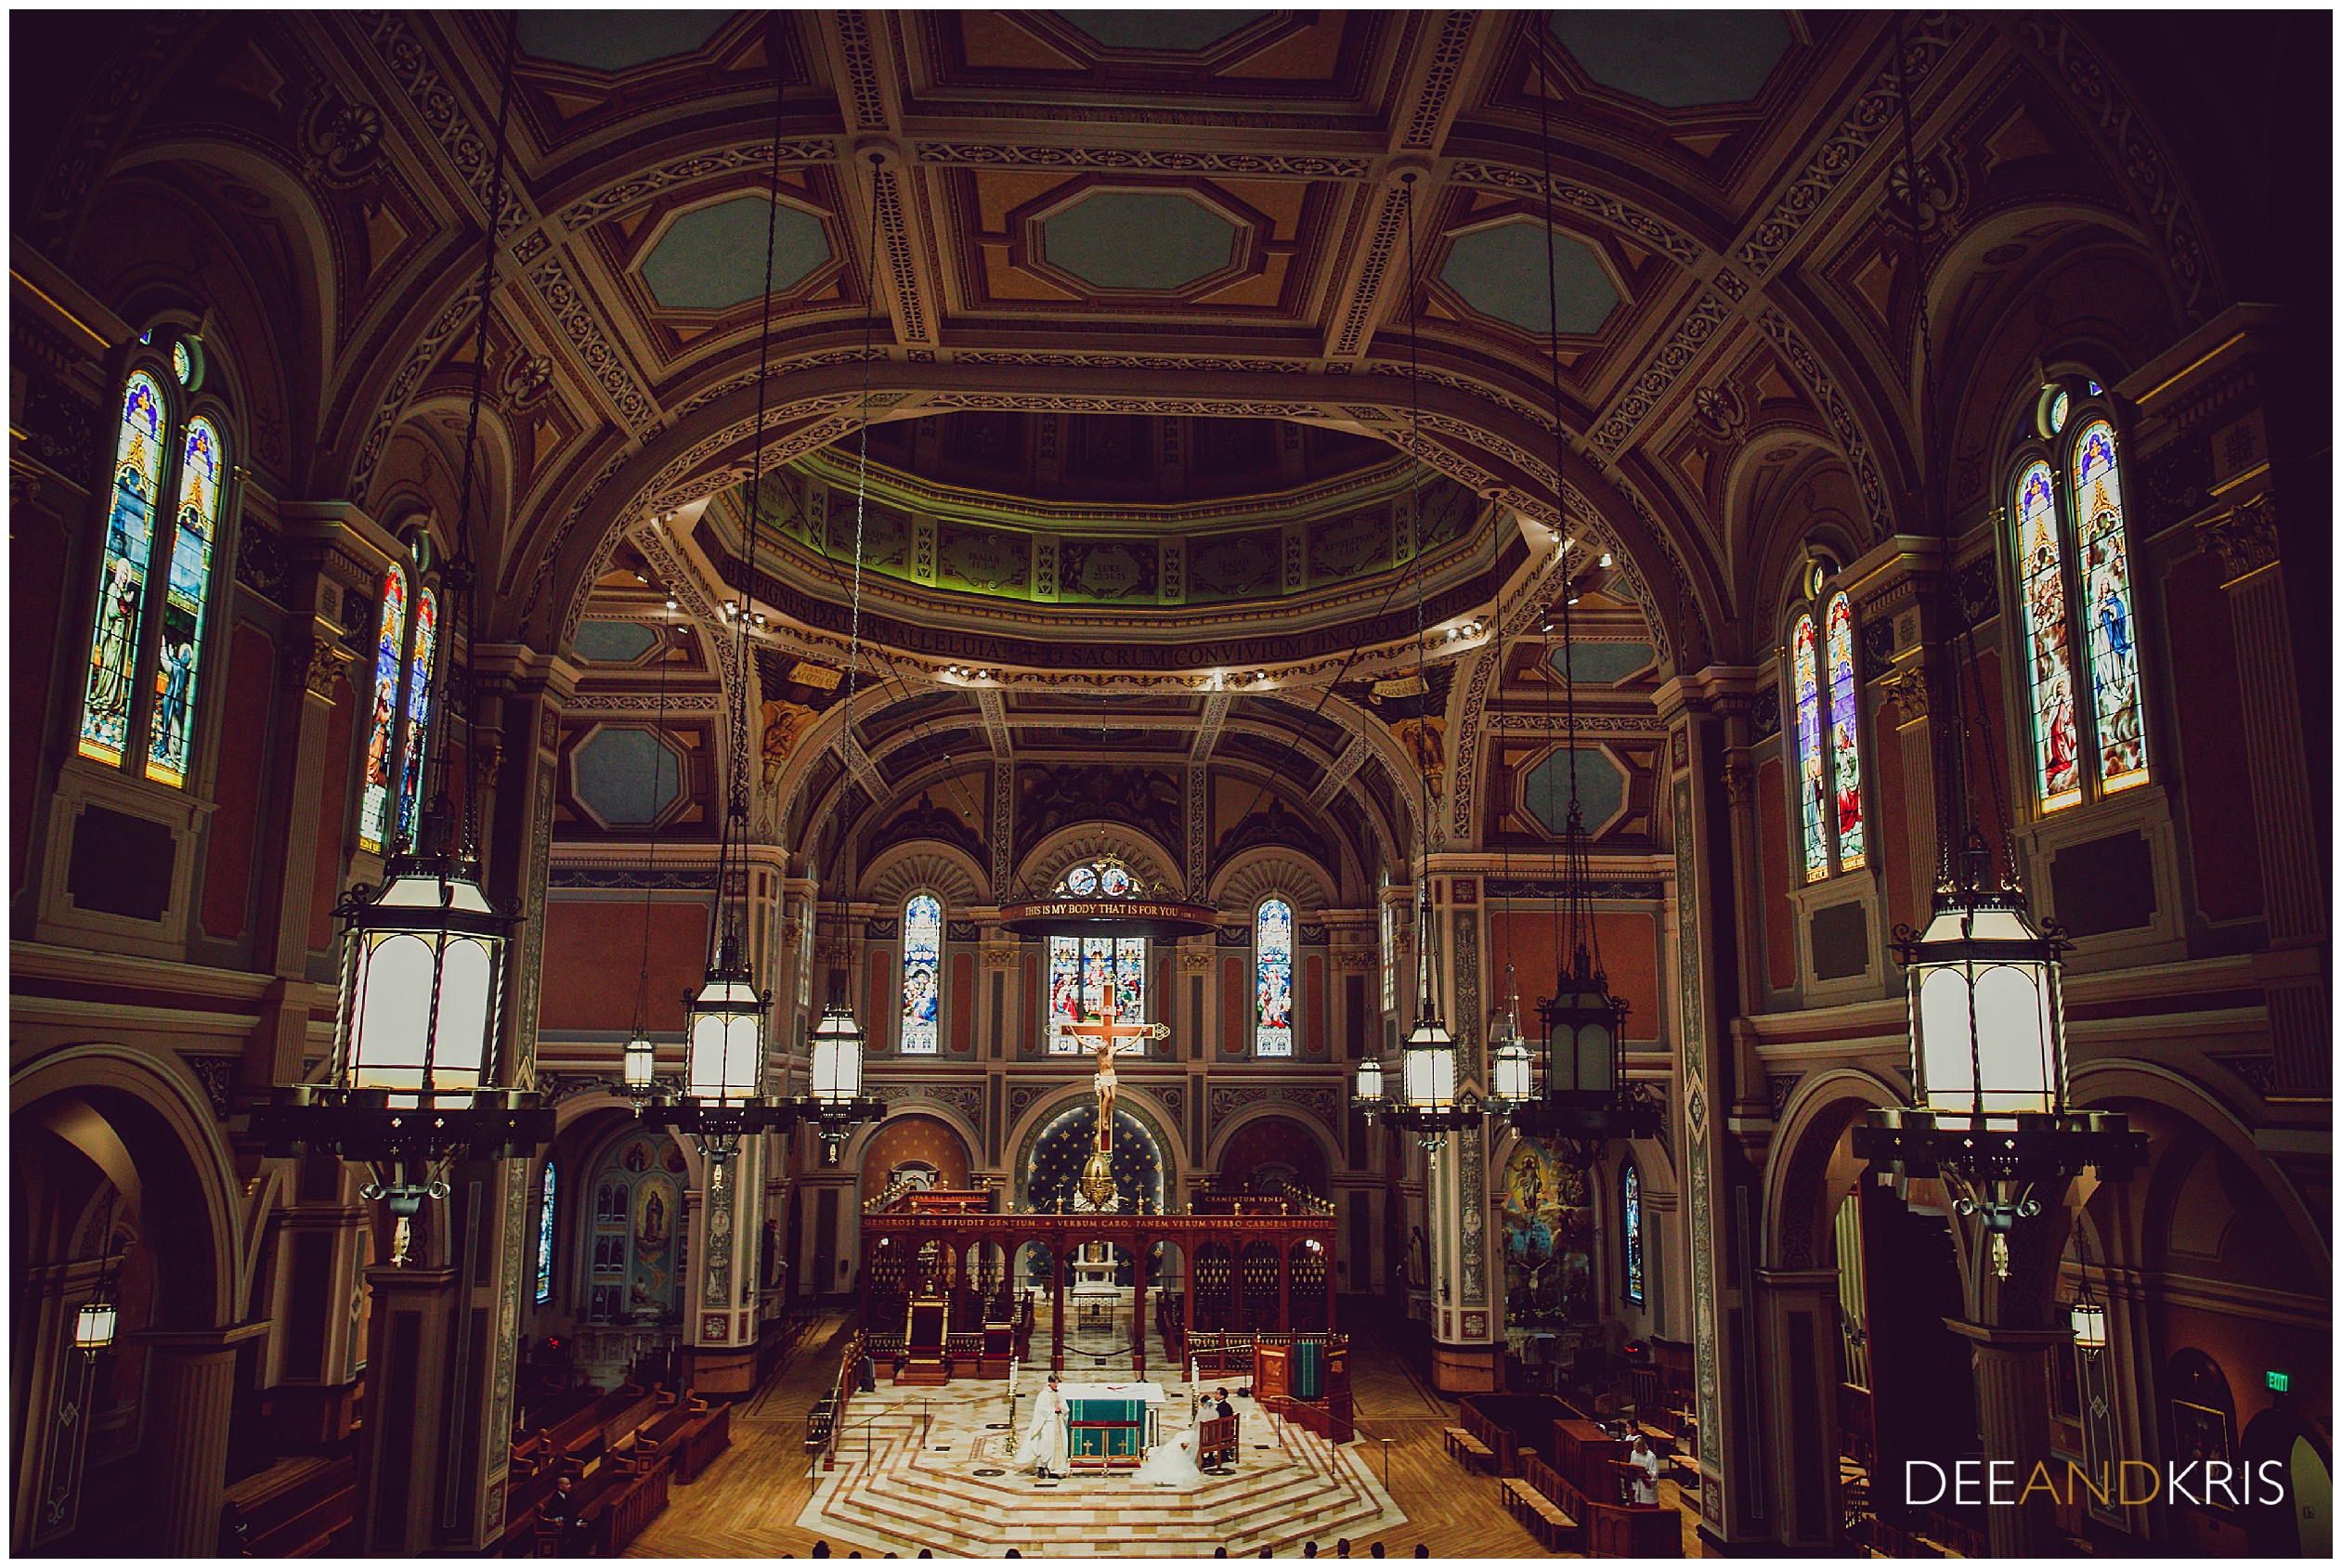 Wedding Ceremony at Cathedral of the Blessed Sacrament